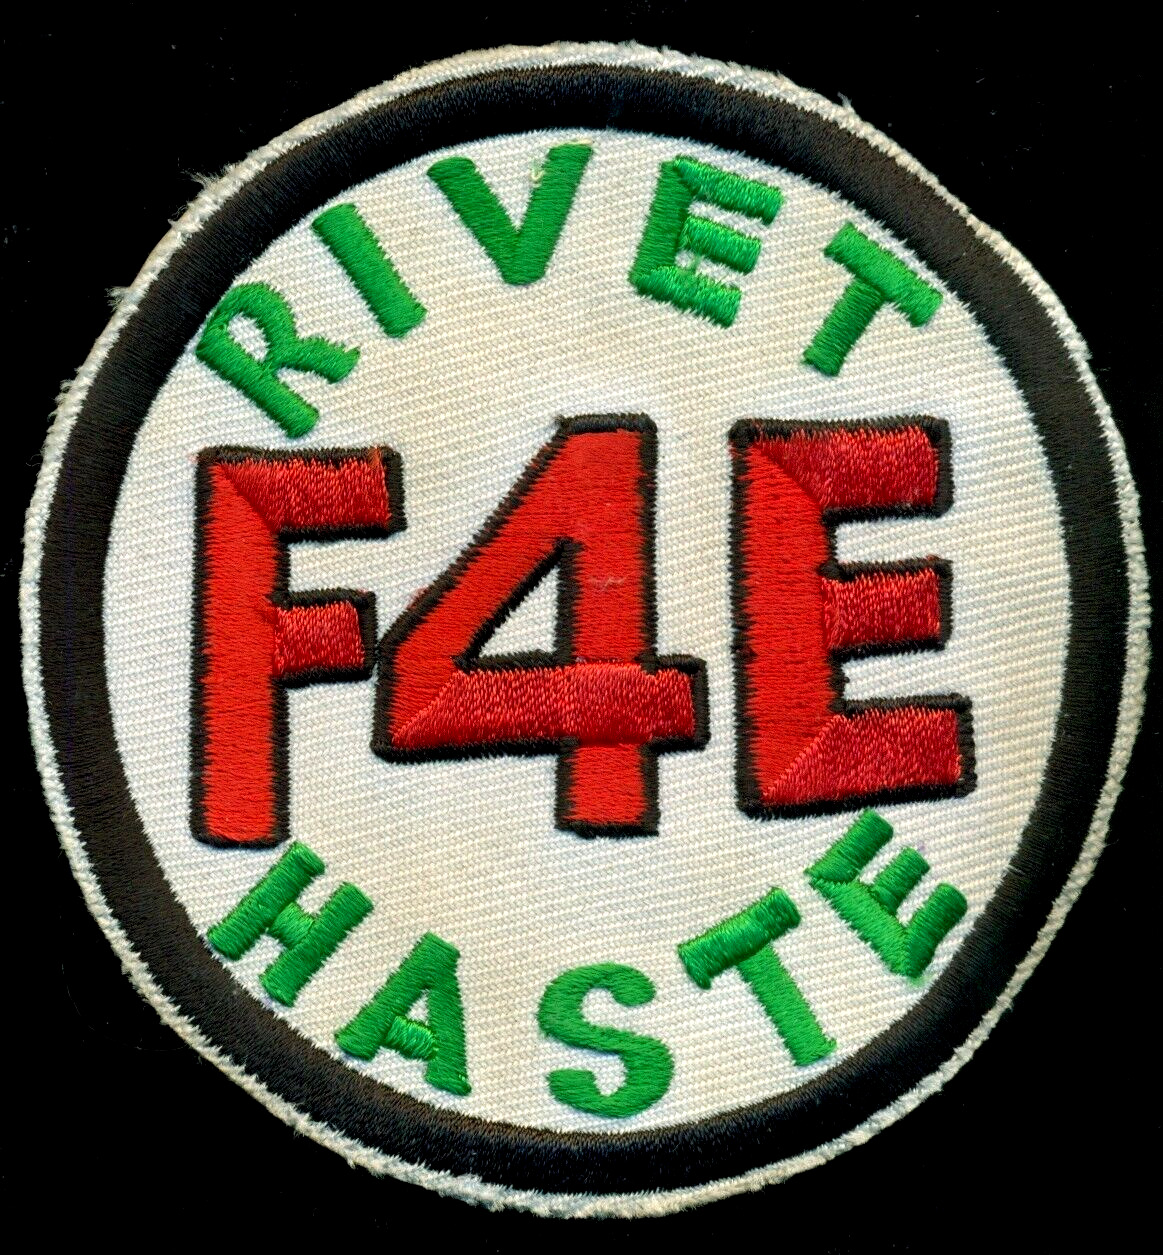 USAF 555th Tactical Fighter Squadron Project Rivet Haste Patch S-13